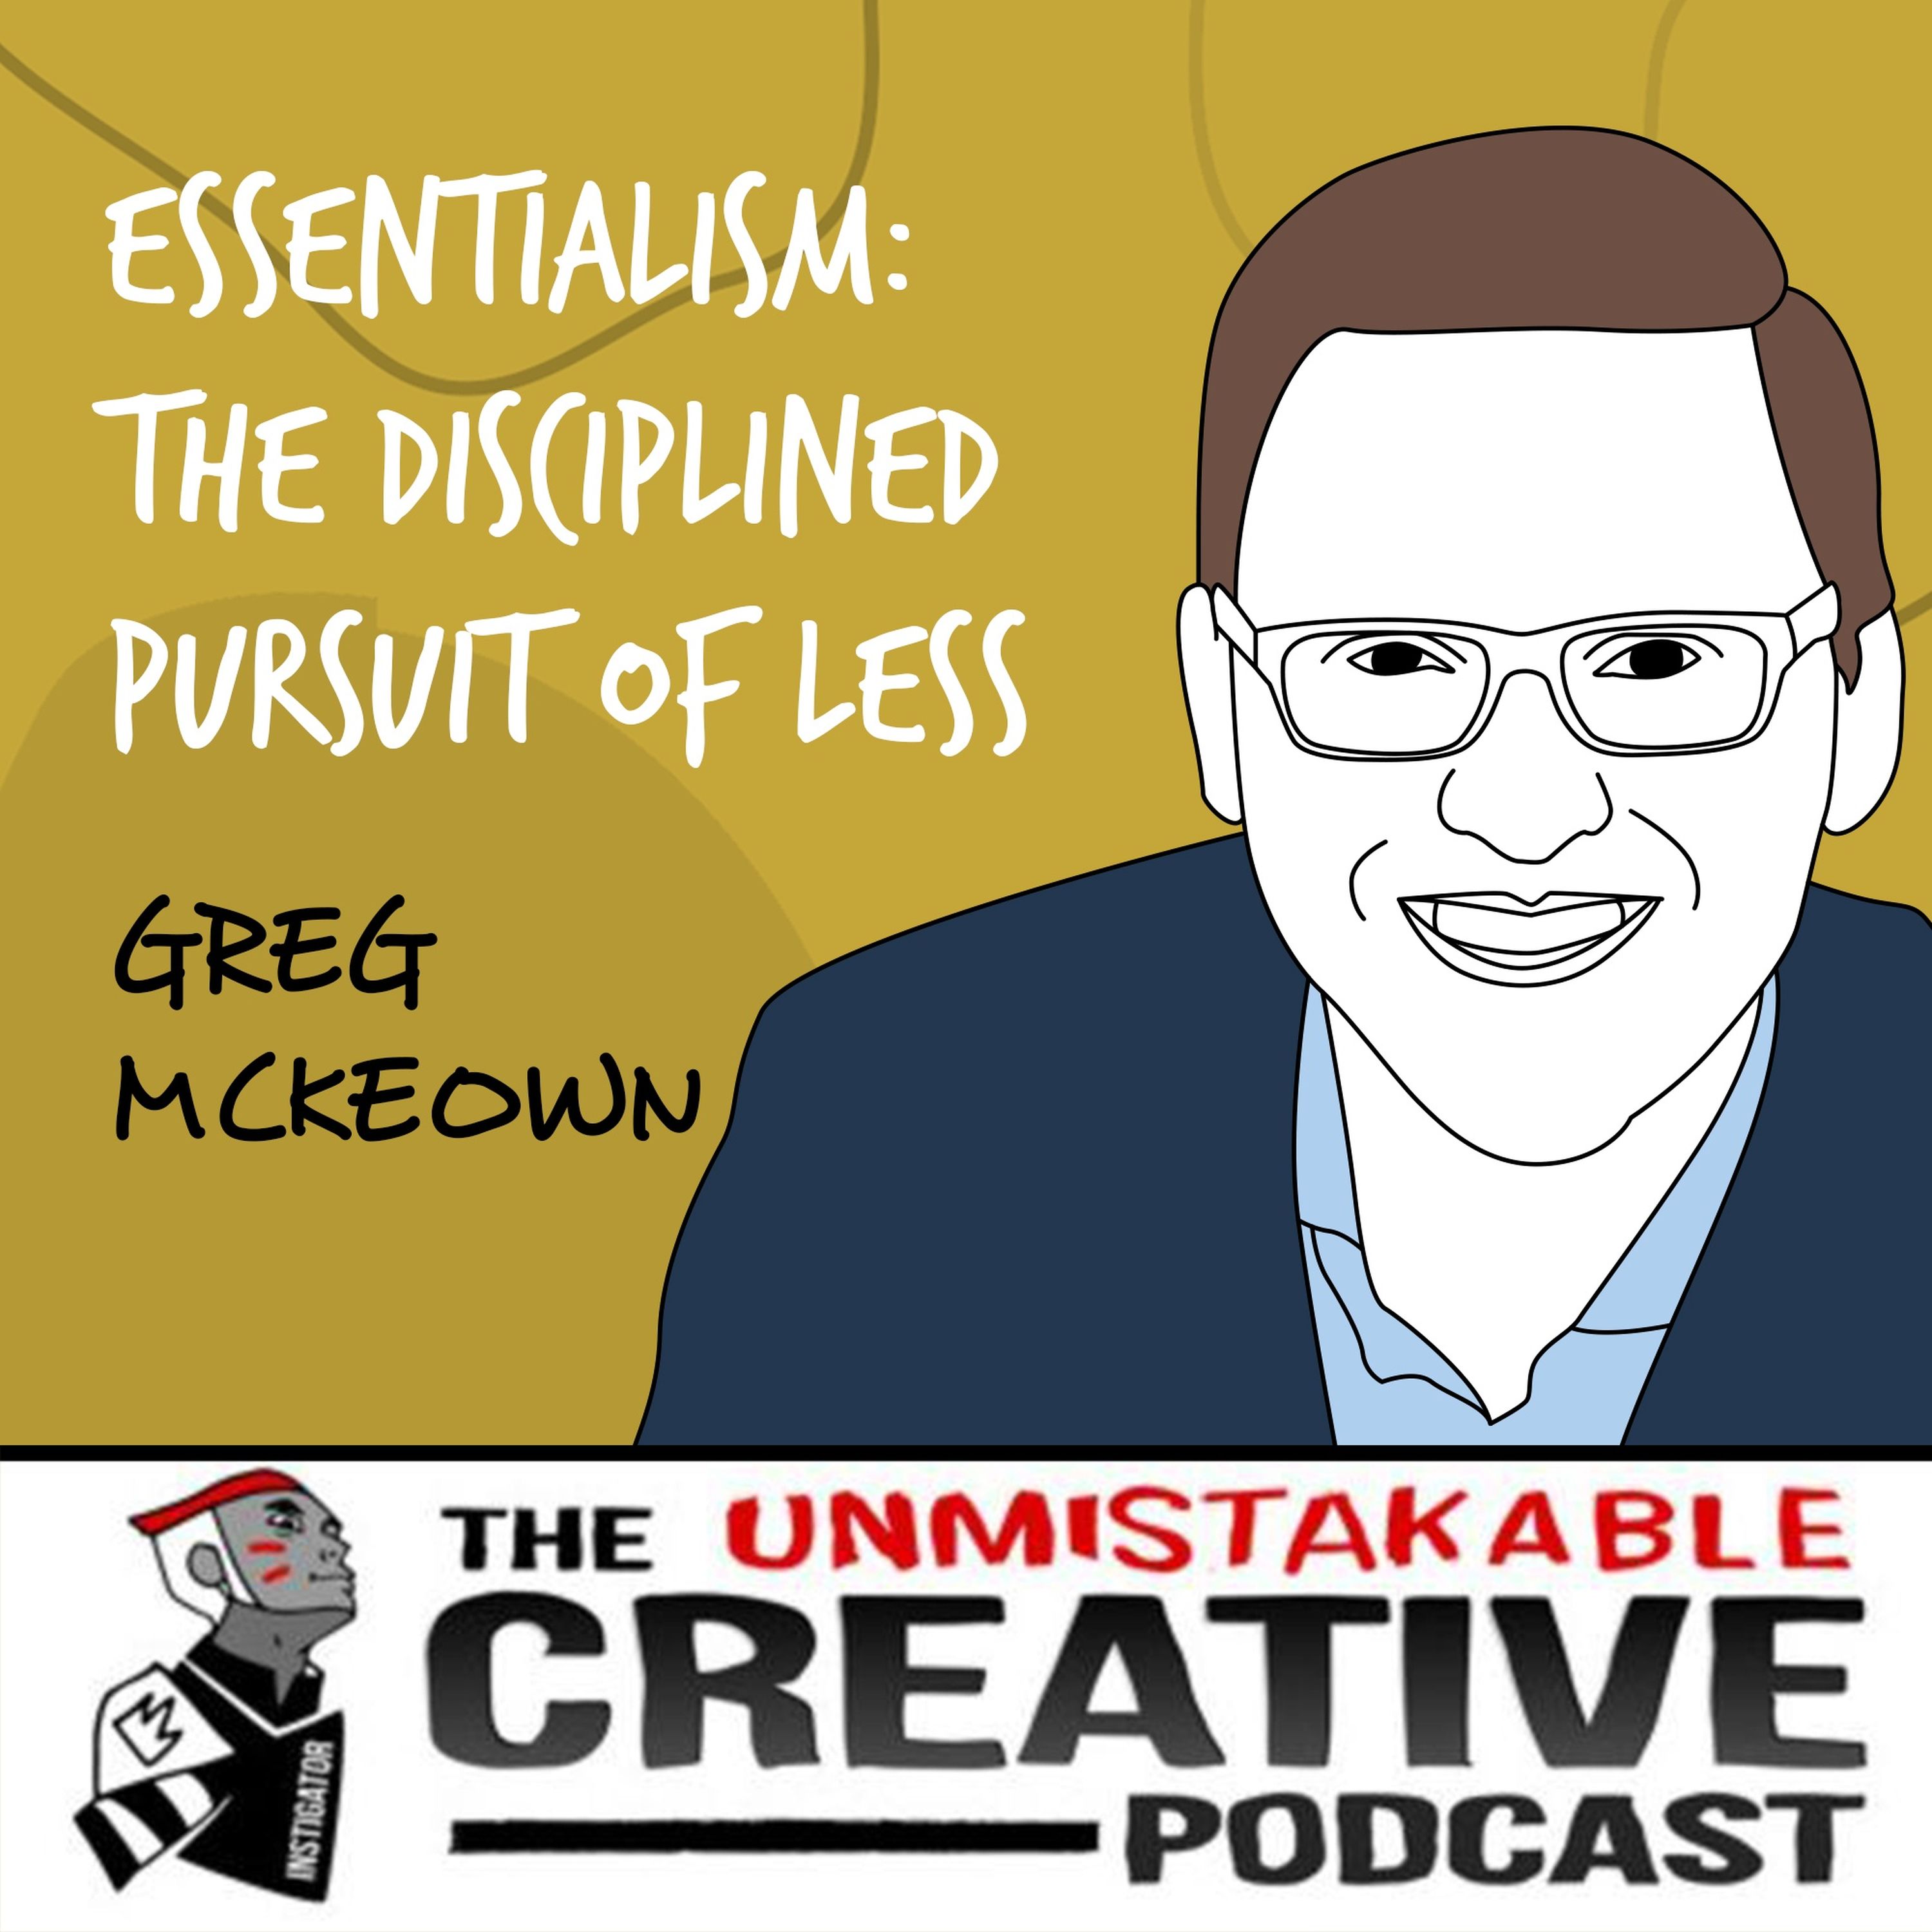 The Unmistakable Creative Podcast